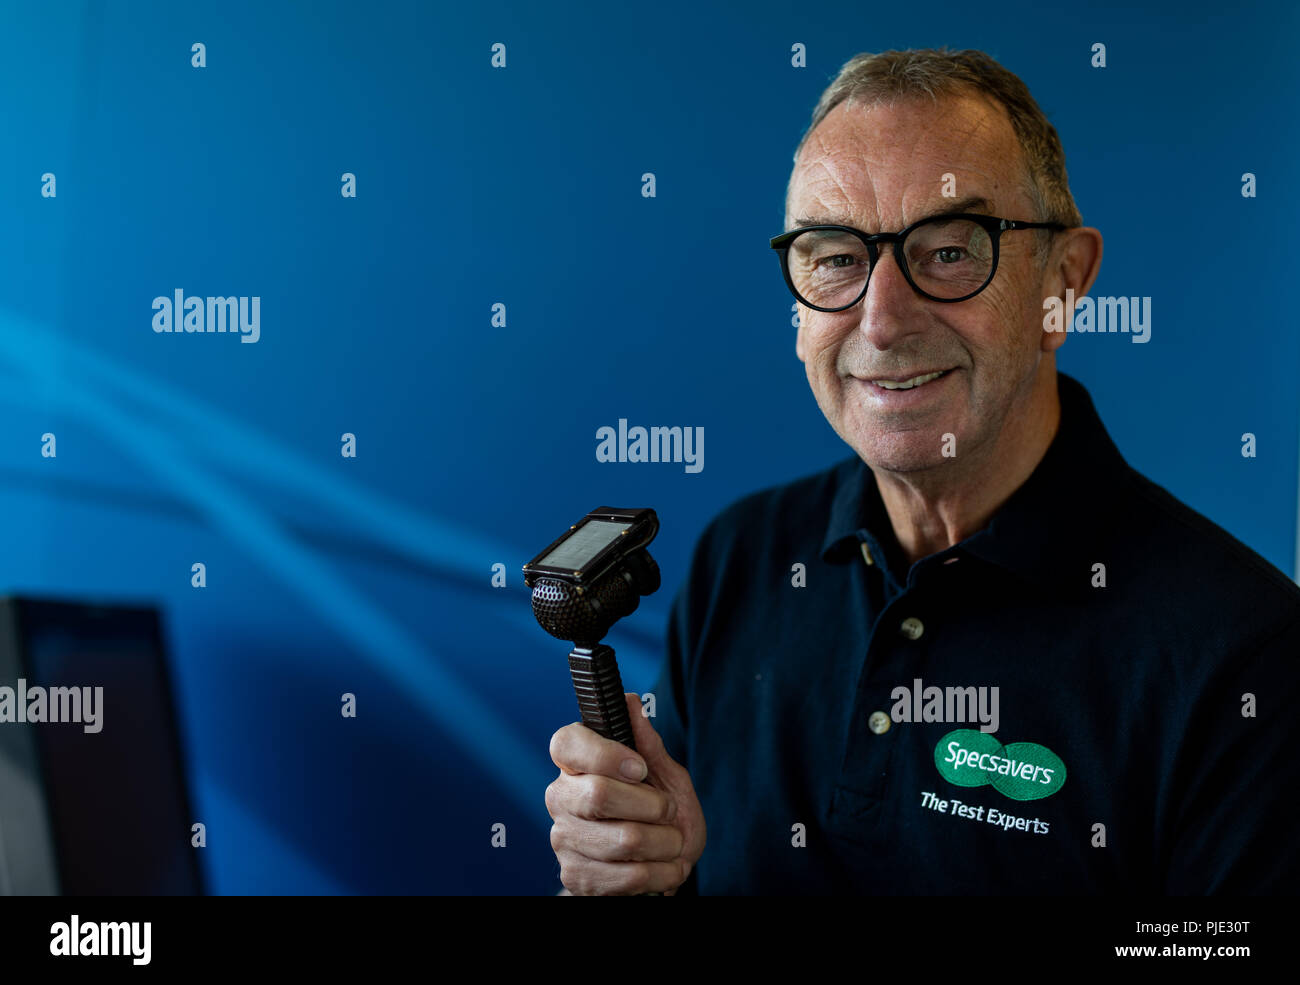 David 'Bumble' Lloyd poses for a photographer during a Specsavers event at the Kia Oval, London. Stock Photo